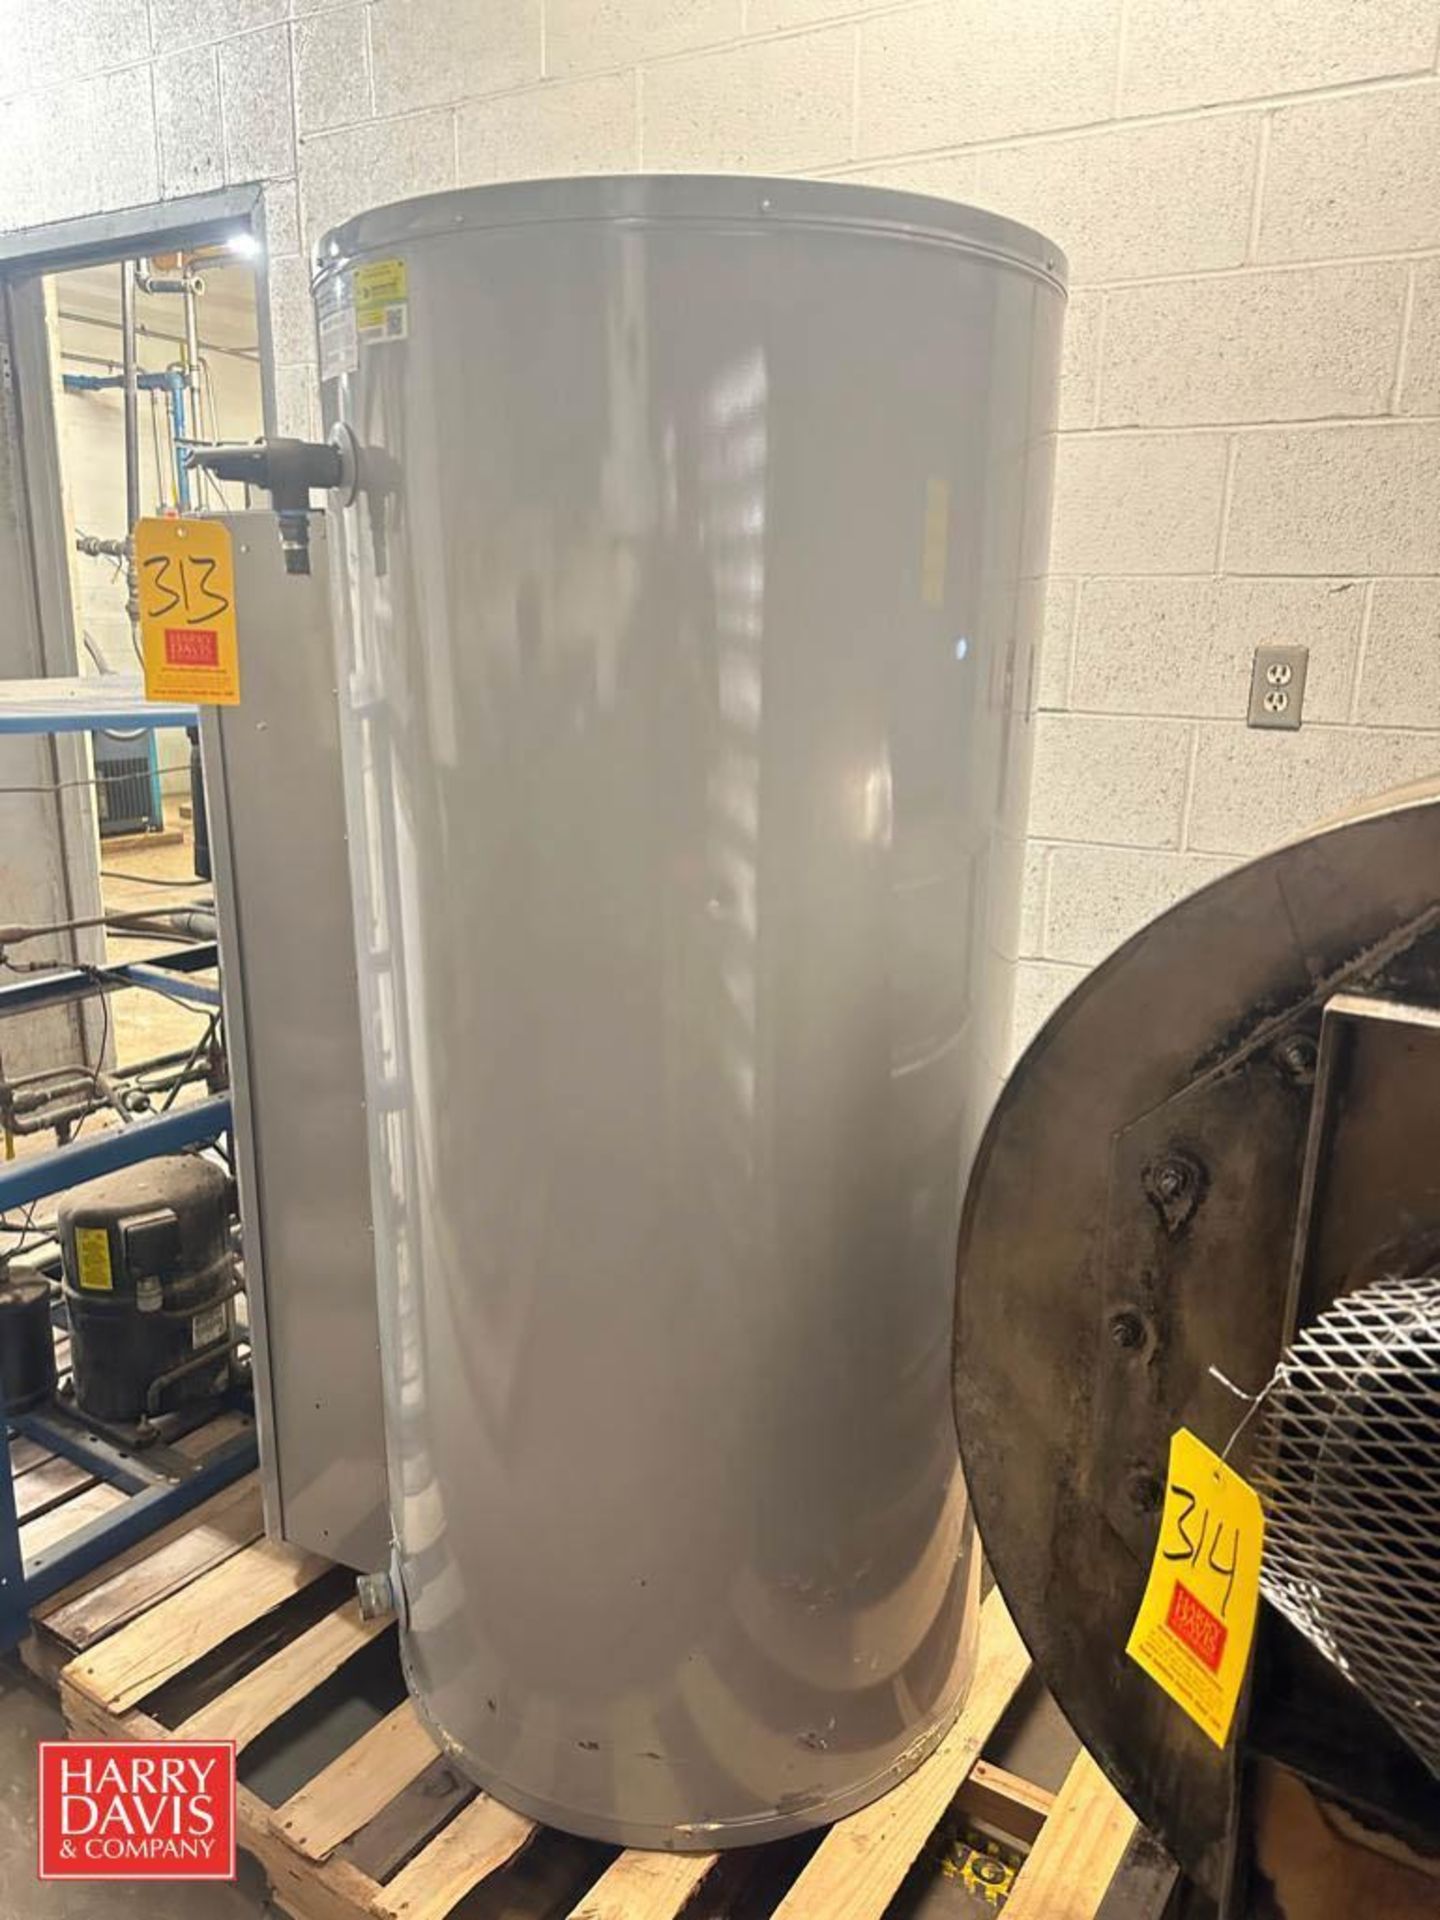 A.O. Smith 8 Gallon Hot Water Heater, Model: DRE-120100, S/N: 1917114670452